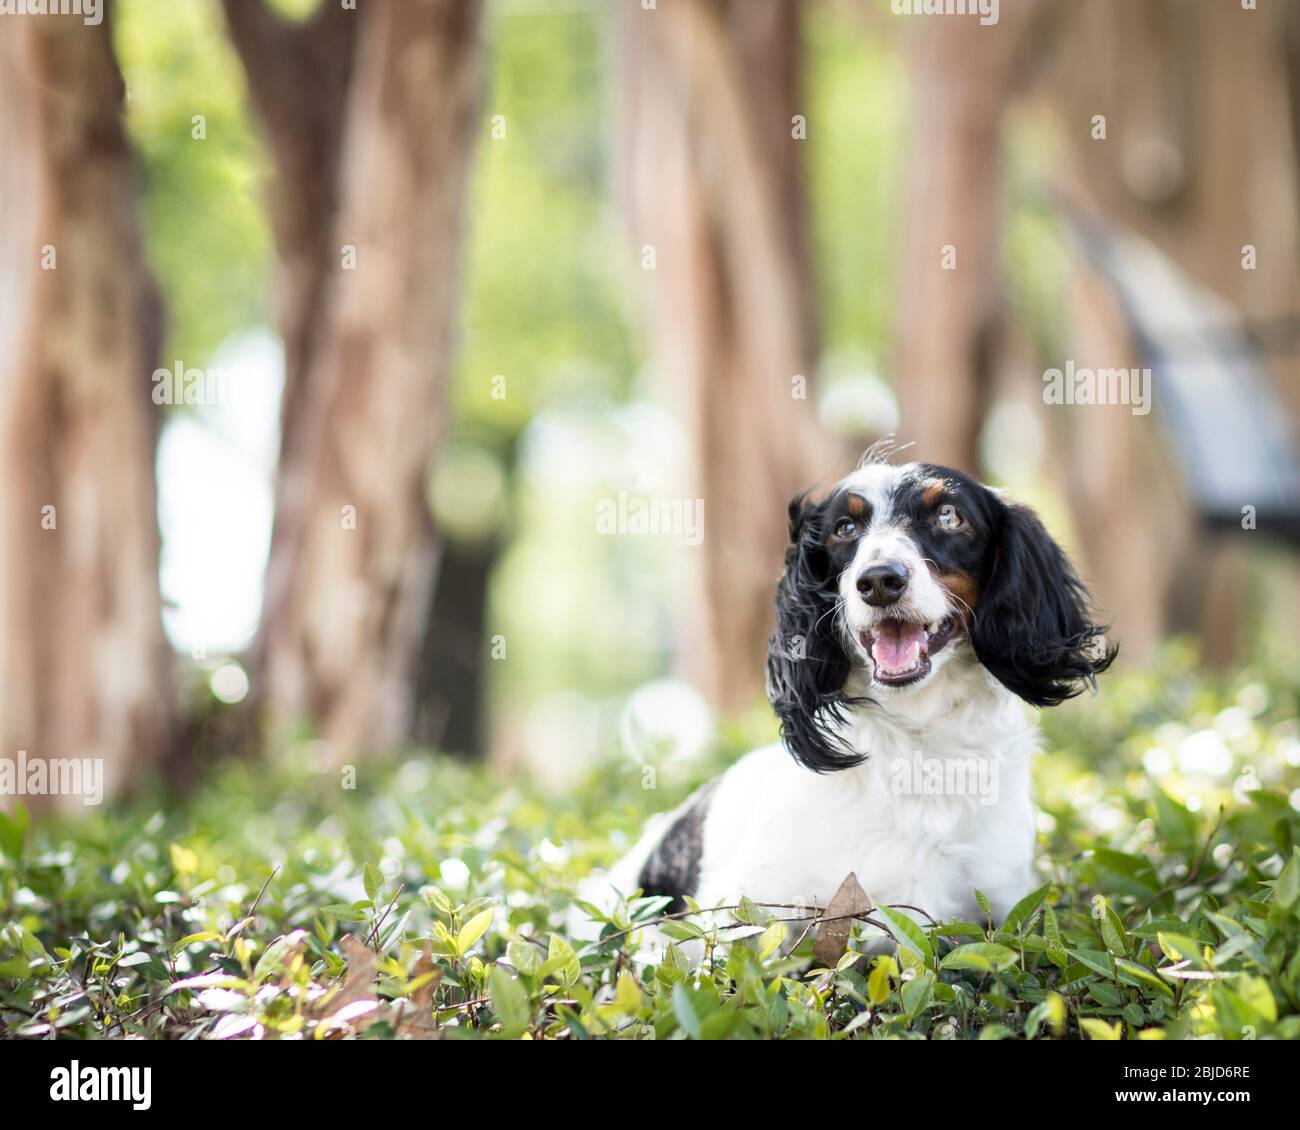 A Black Long Haired Dachshund High Resolution Stock Photography and Images  - Alamy